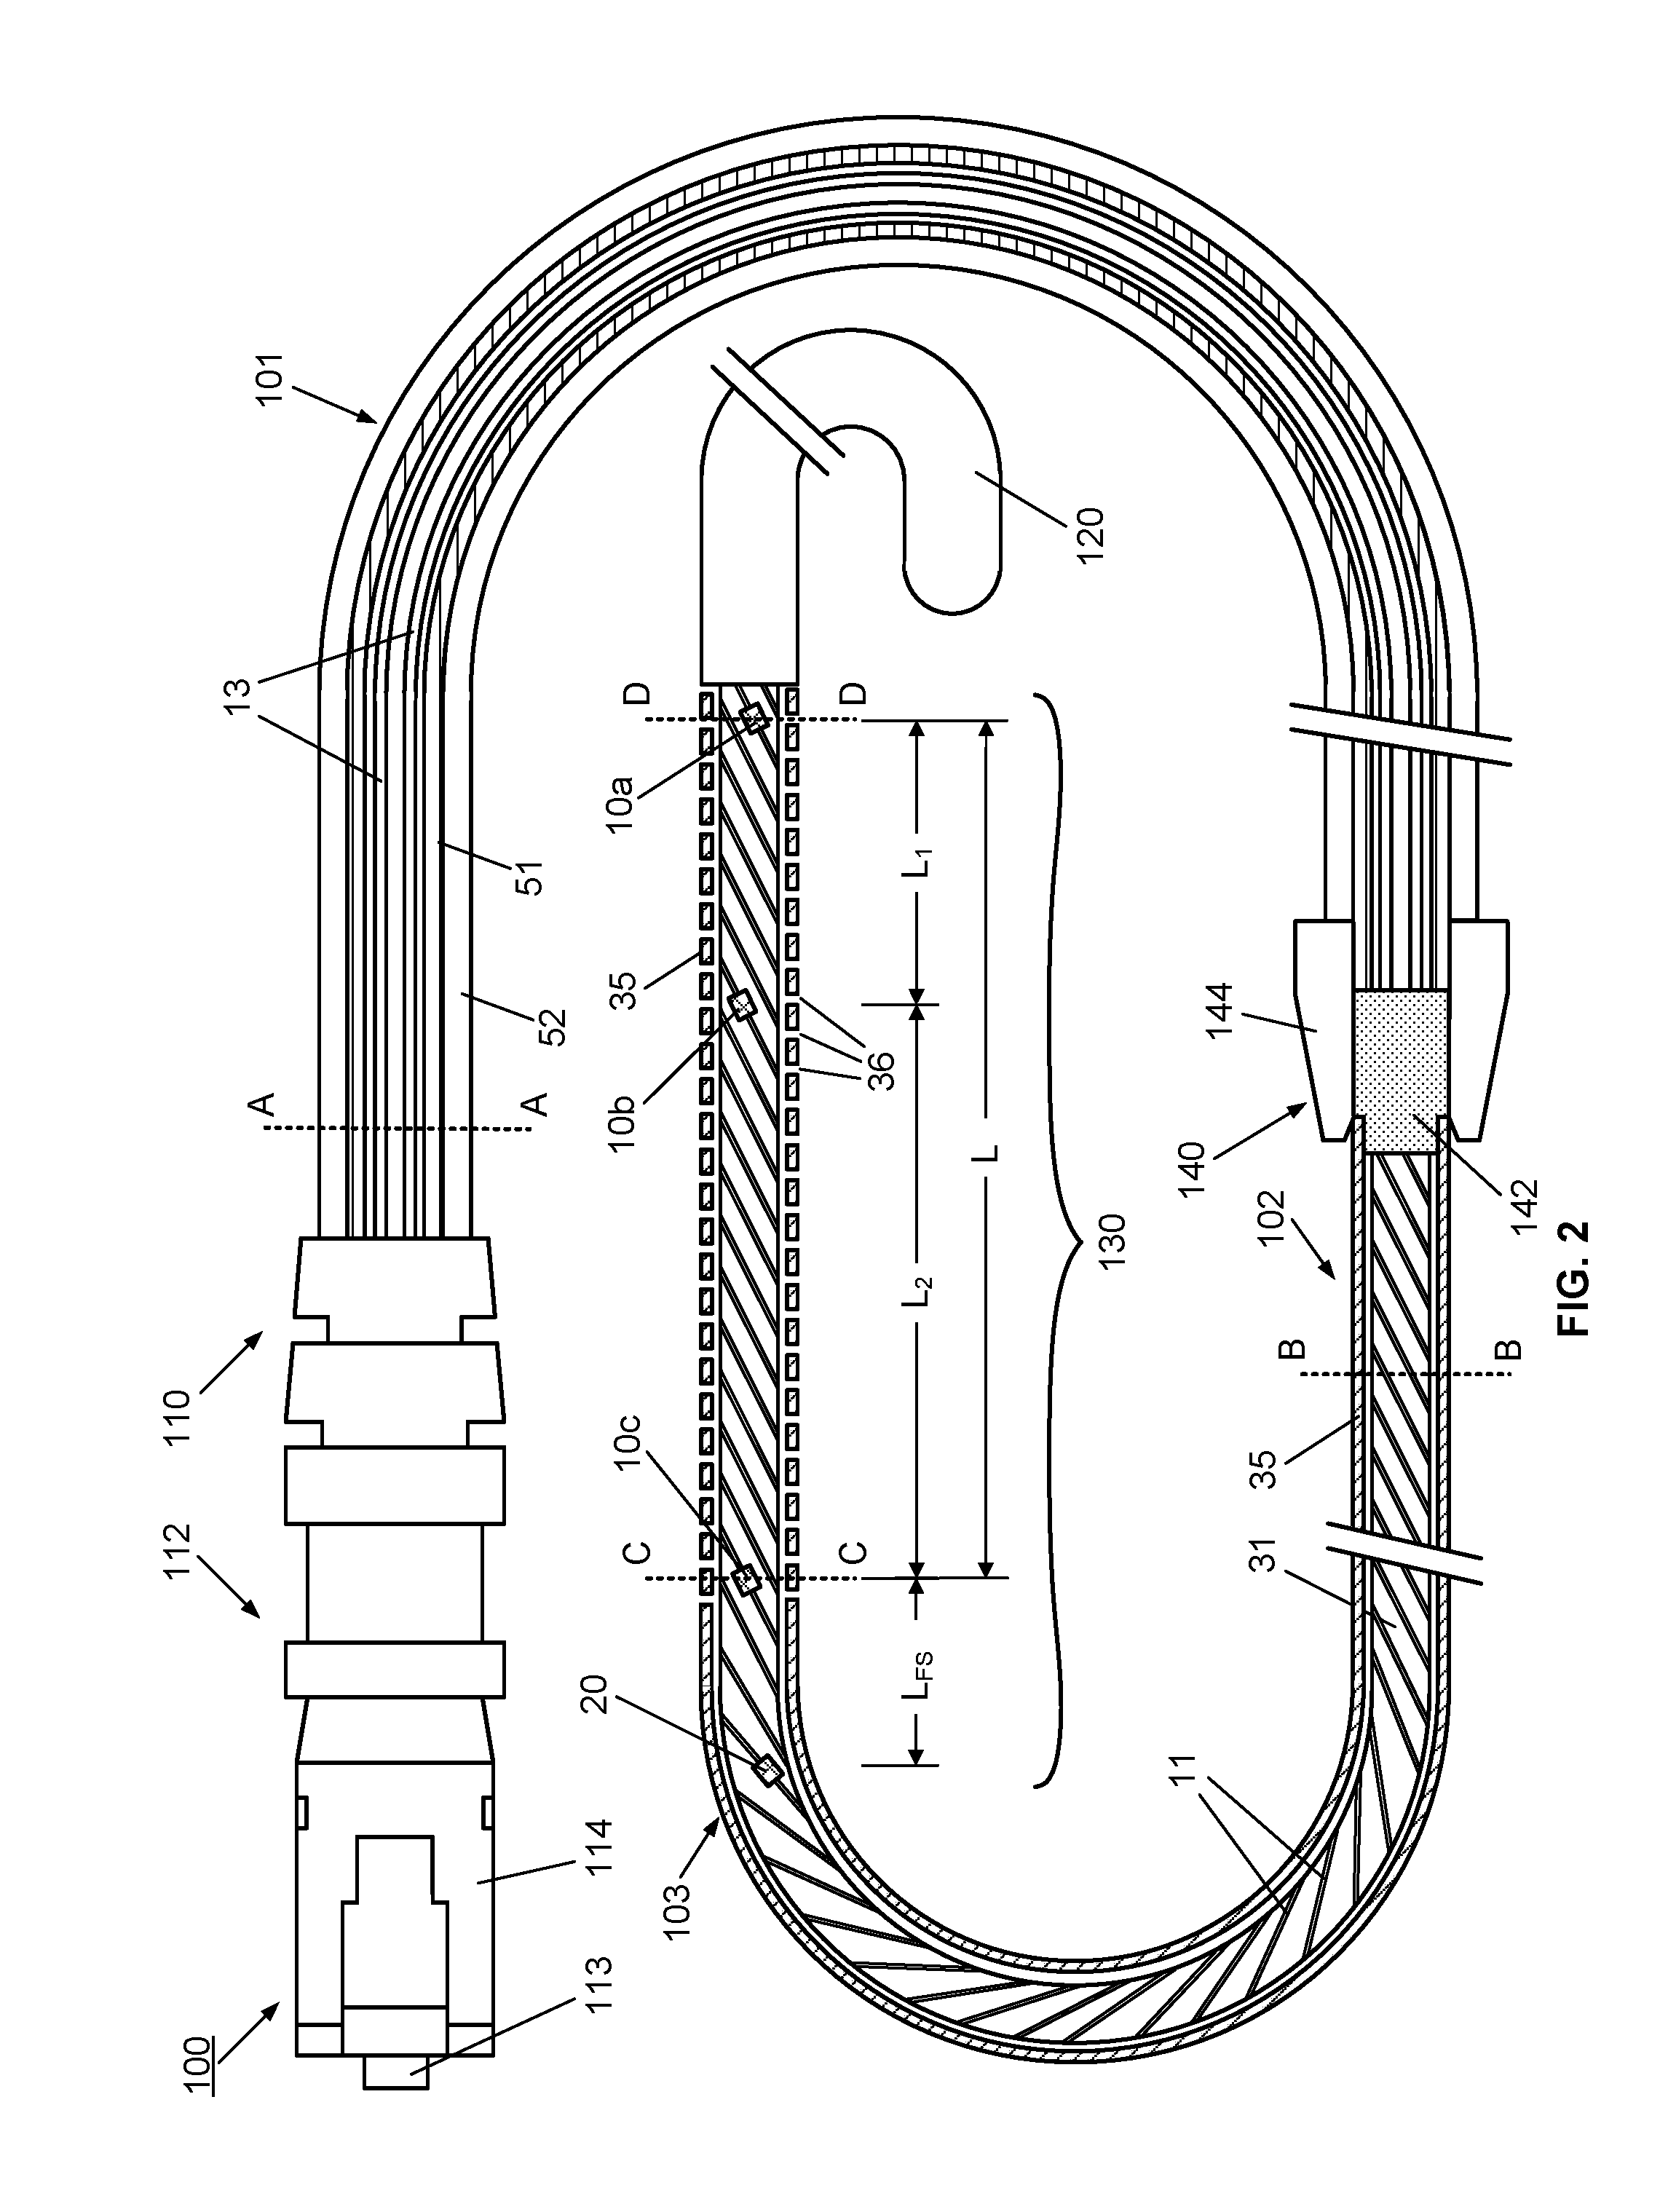 System and apparatus comprising a multisensor guidewire for use in interventional cardiology